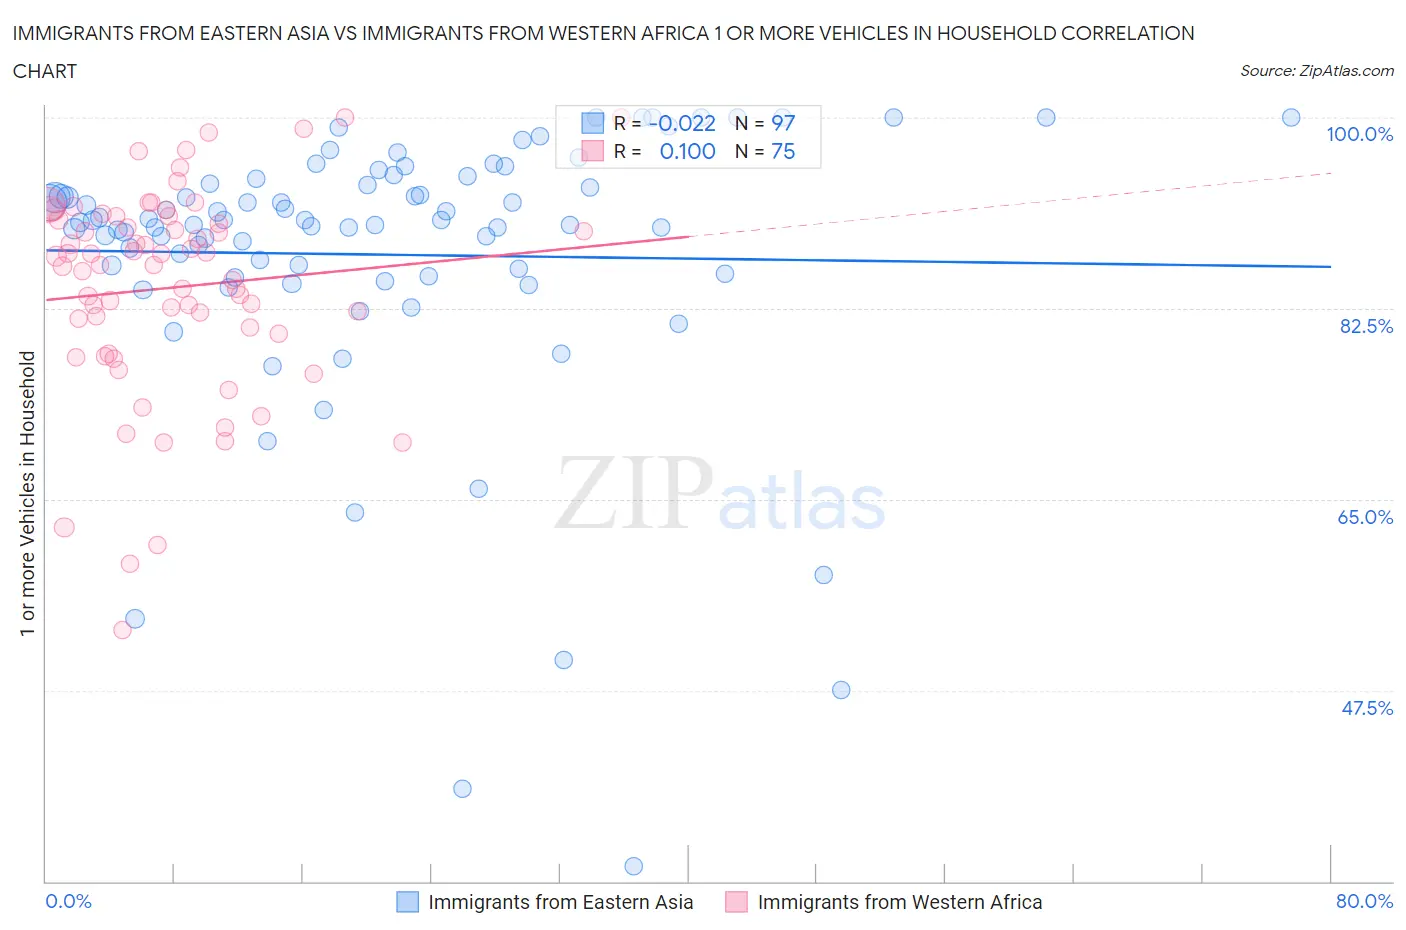 Immigrants from Eastern Asia vs Immigrants from Western Africa 1 or more Vehicles in Household